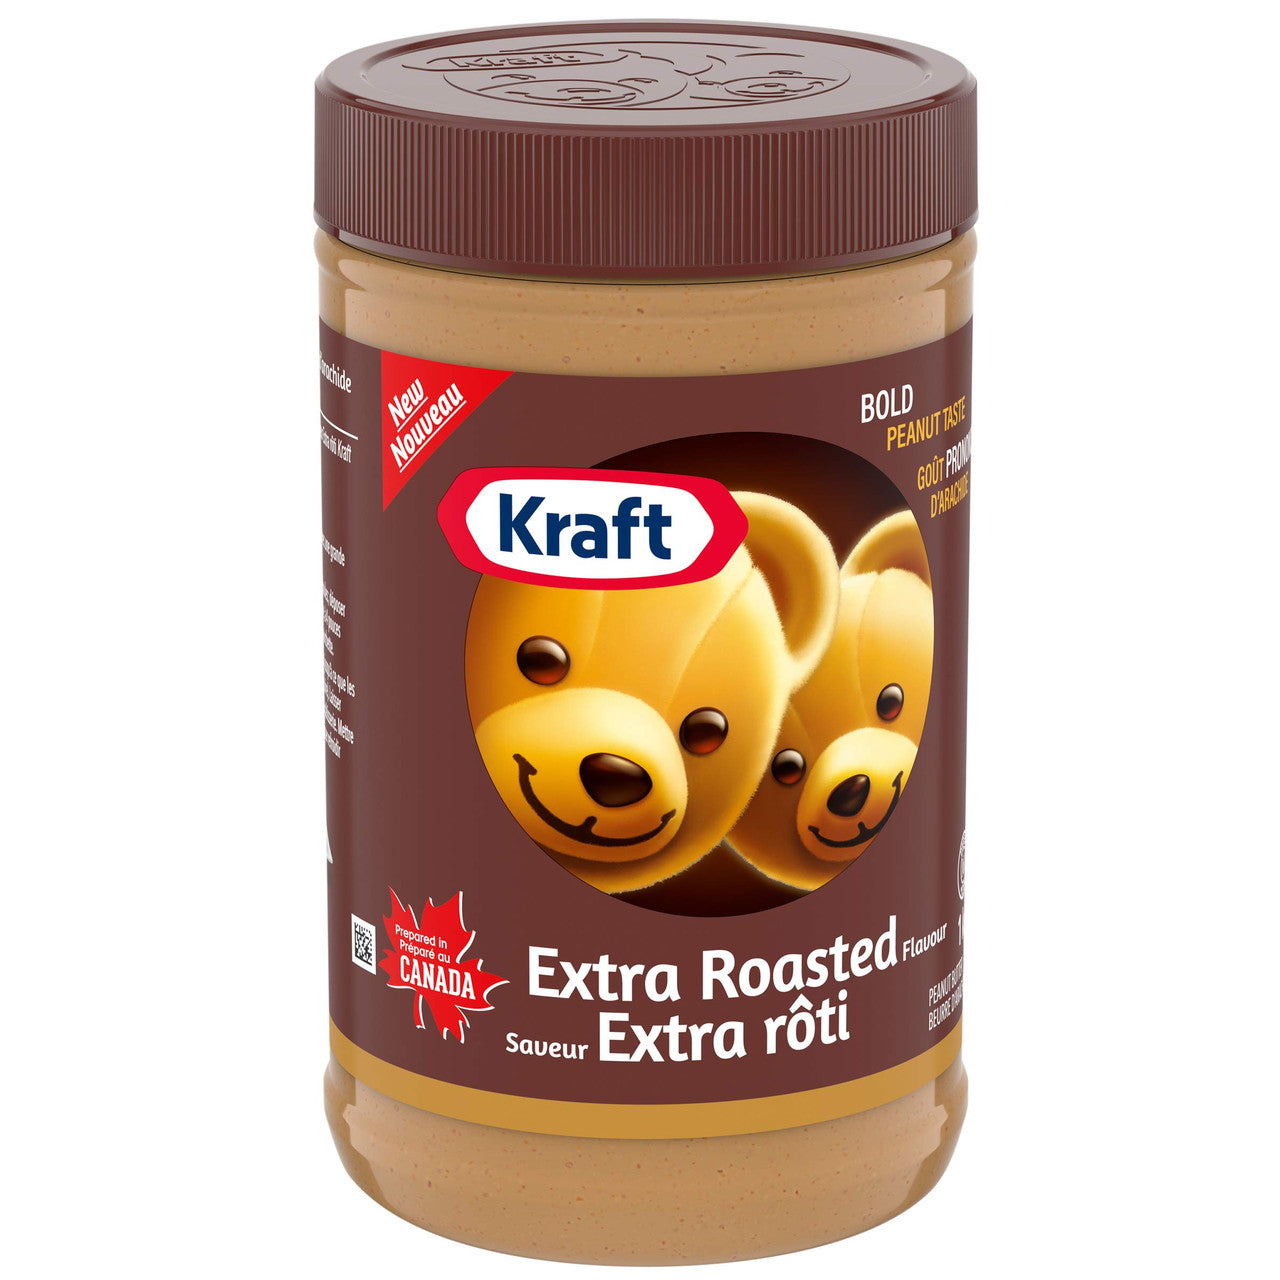 Kraft Extra Roasted Peanut Butter, 1kg/2.2 lbs {Imported from Canada}